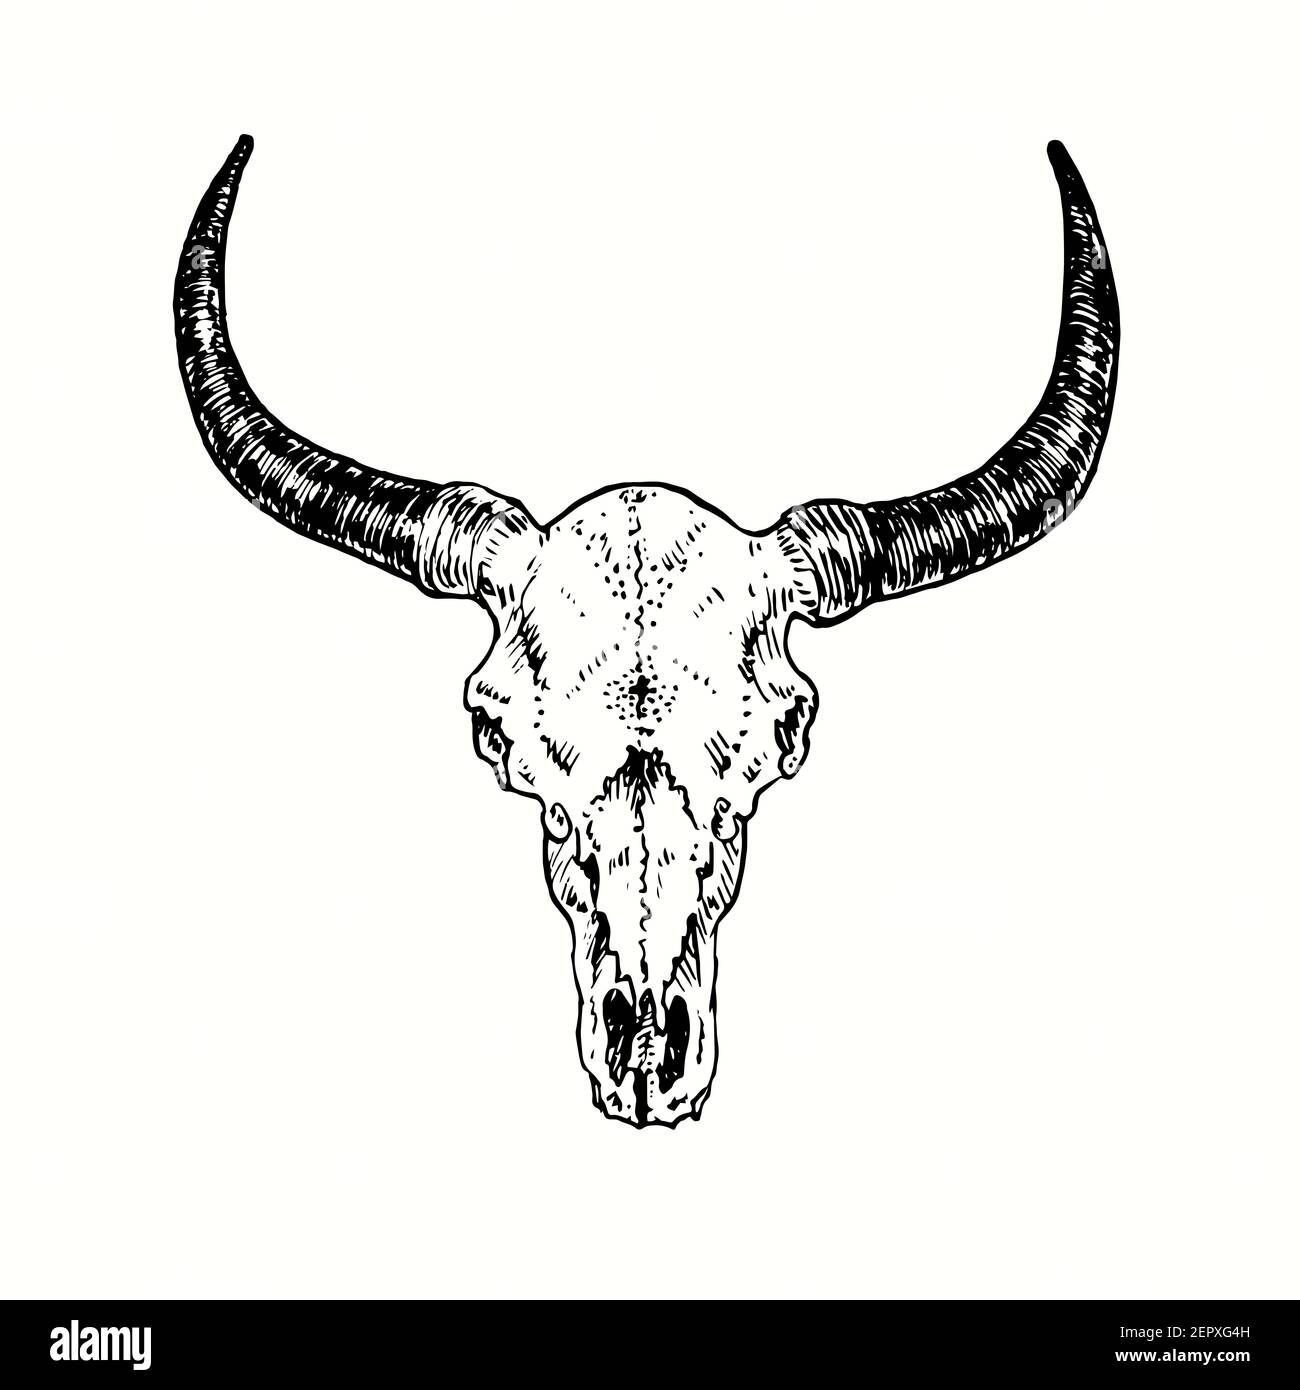 Bull skull, front view. Ink black and white drawing. Stock Photo